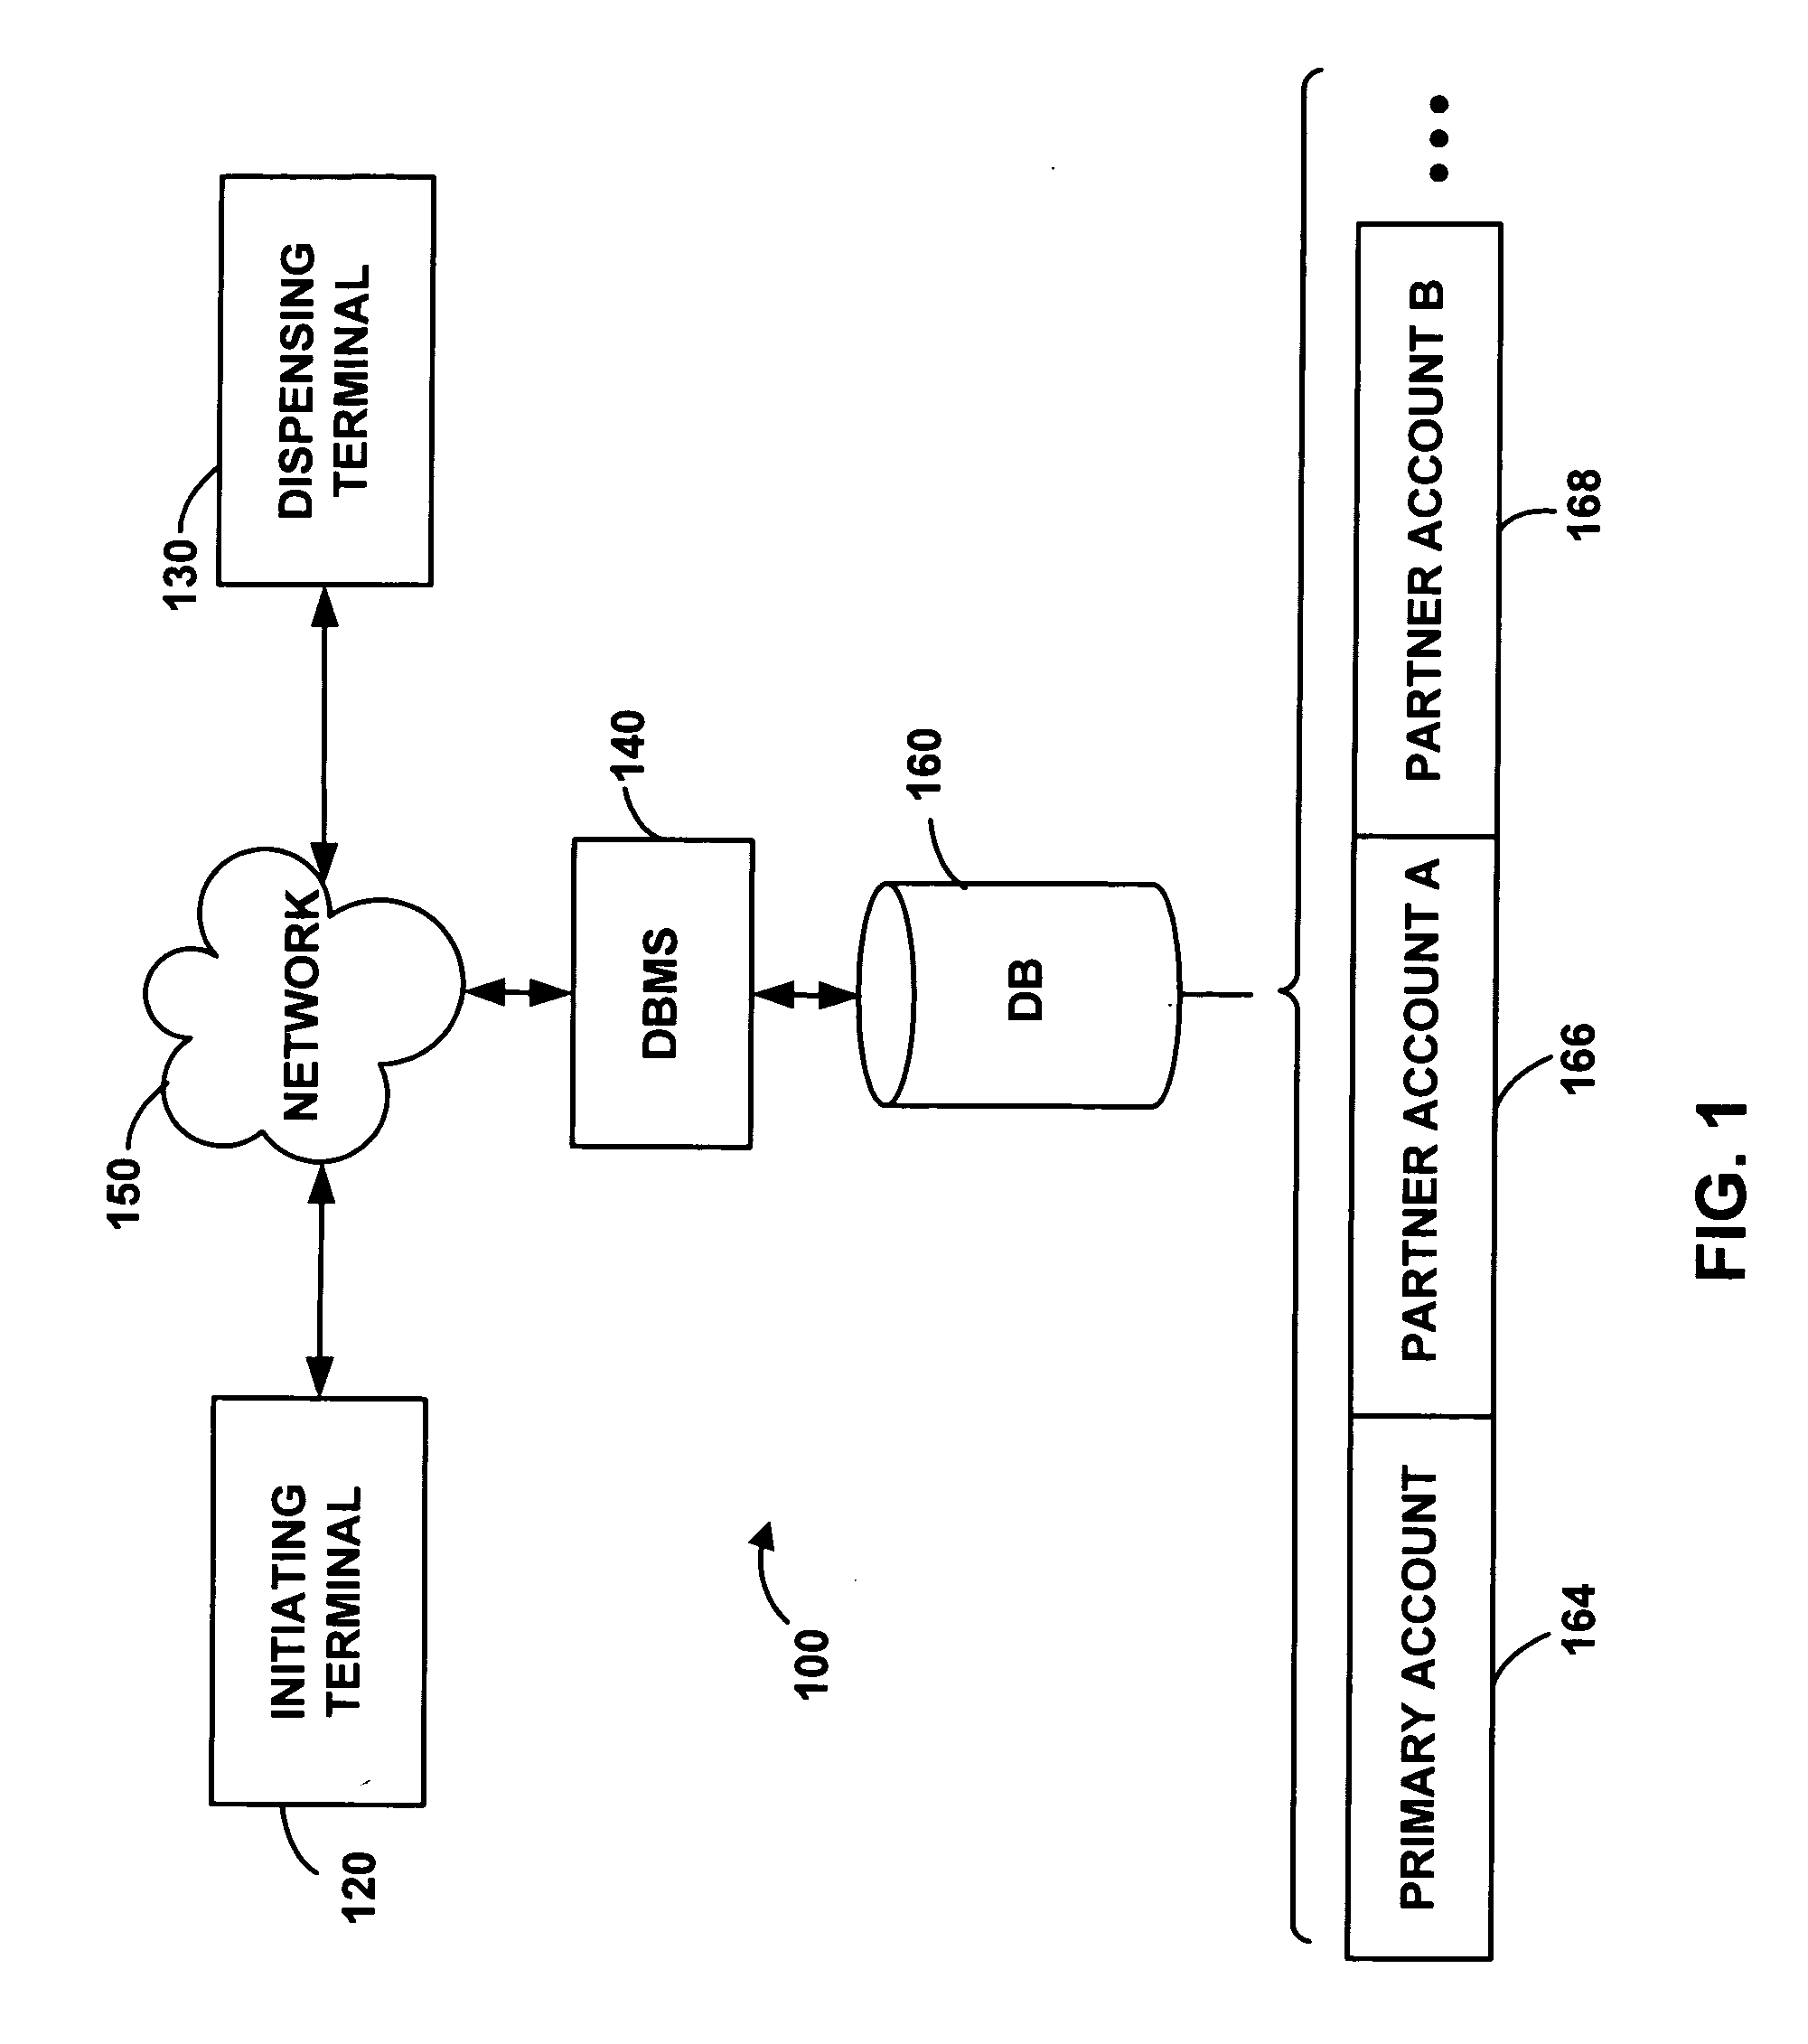 System and method for transferring money